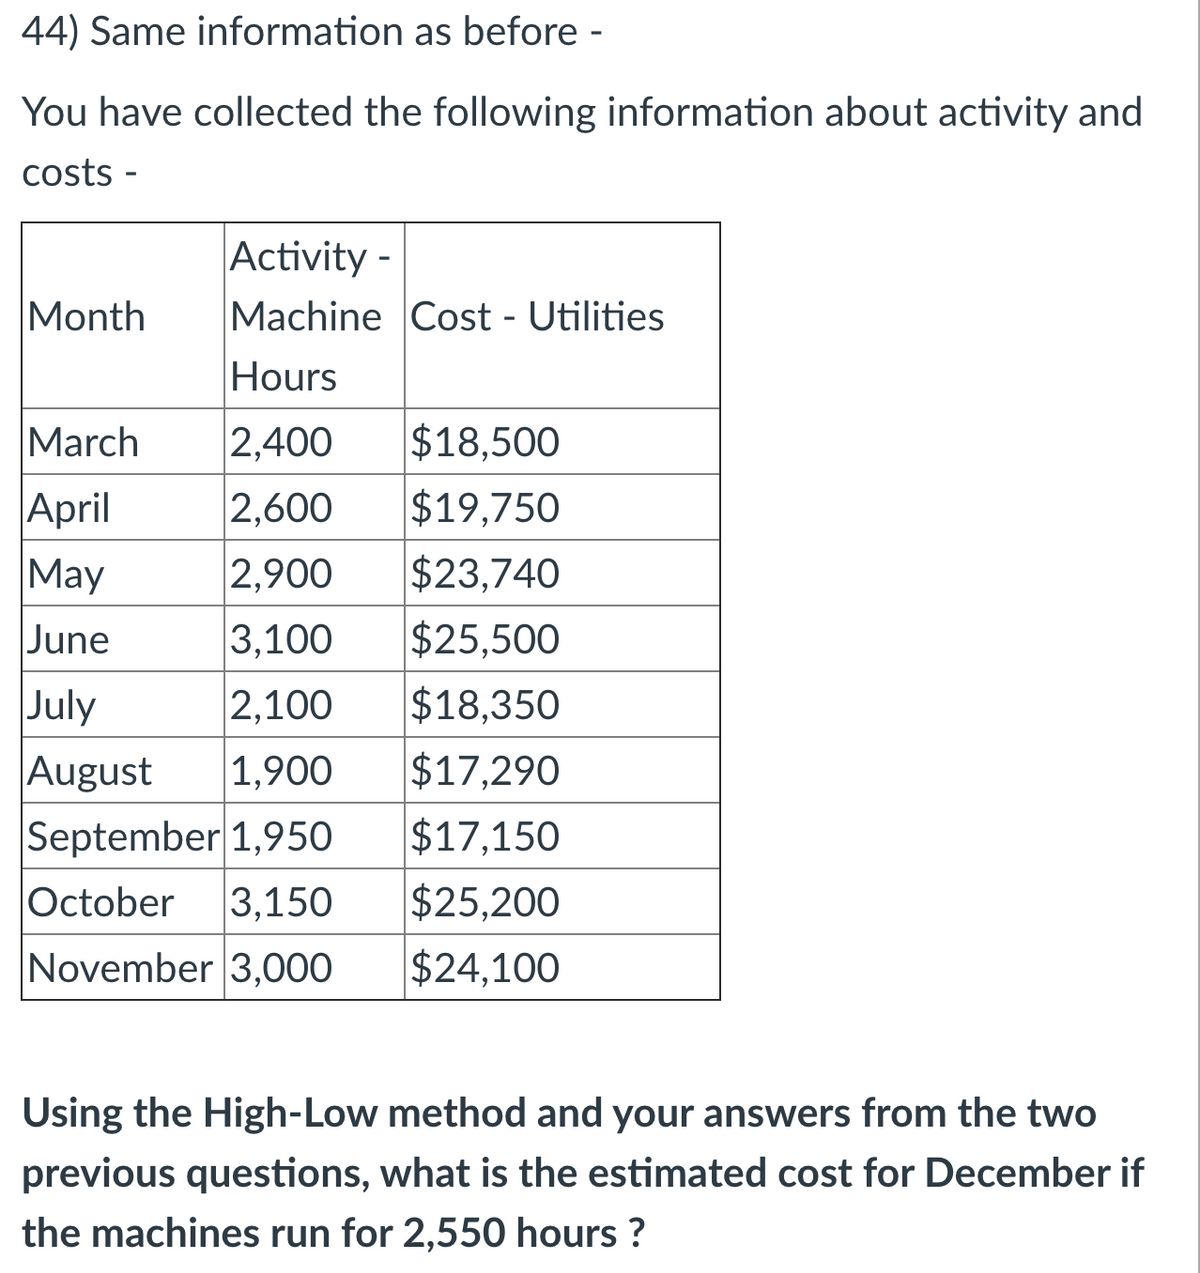 44) Same information as before -
You have collected the following information about activity and
costs -
Activity -
Machine Cost - Utilities
Month
Hours
March
2,400
$18,500
2,600
$19,750
April
May
2,900
$23,740
$25,500
$18,350
$17,290
June
3,100
July
August
September 1,950
October
2,100
1,900
$17,150
3,150
$25,200
November 3,000
$24,100
Using the High-Low method and your answers from the two
previous questions, what is the estimated cost for December if
the machines run for 2,550 hours ?
